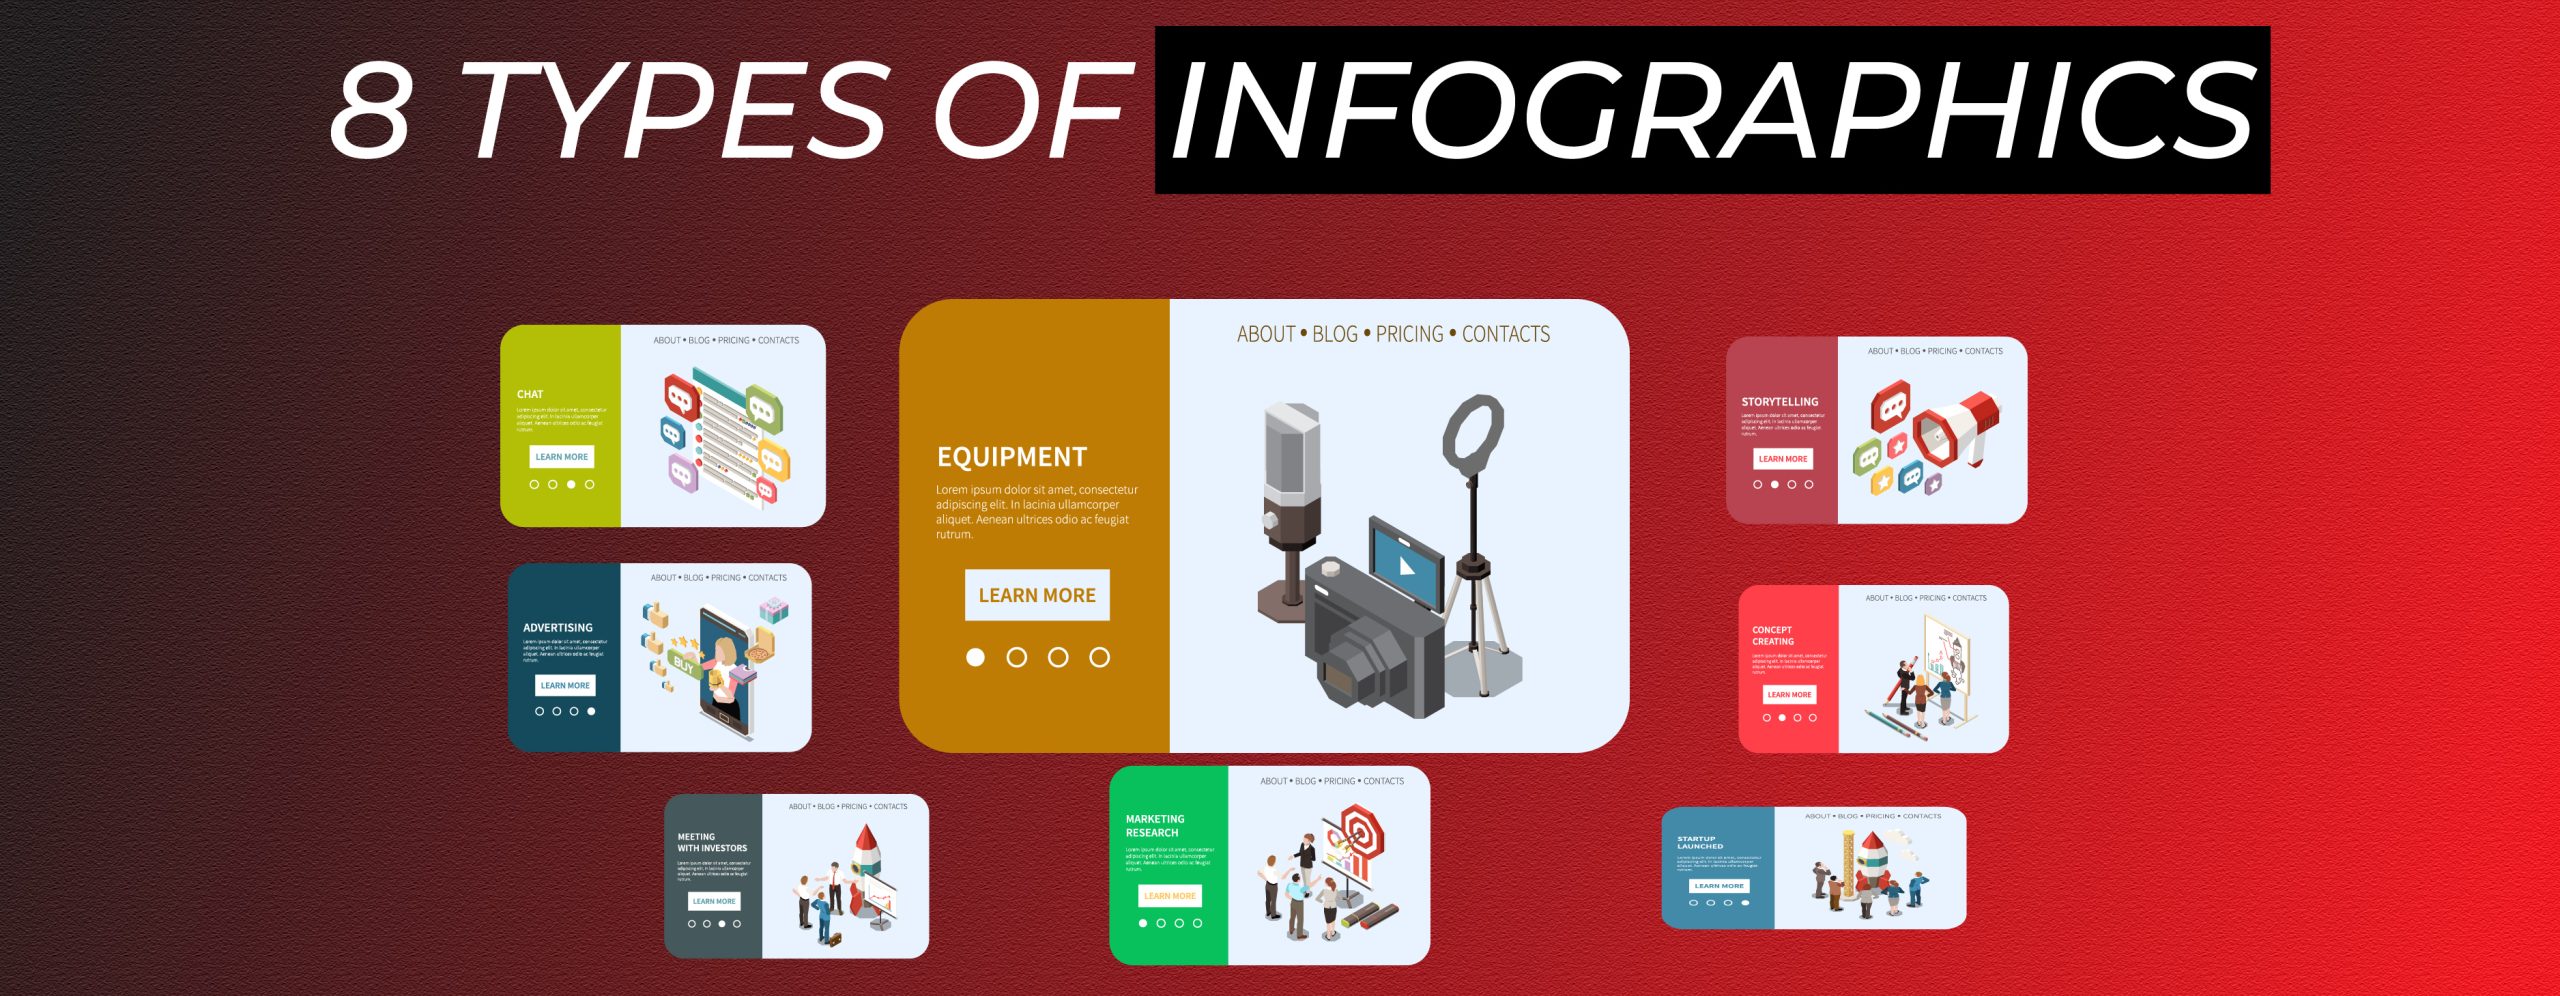 TYPES OF INFOGRAPHICS